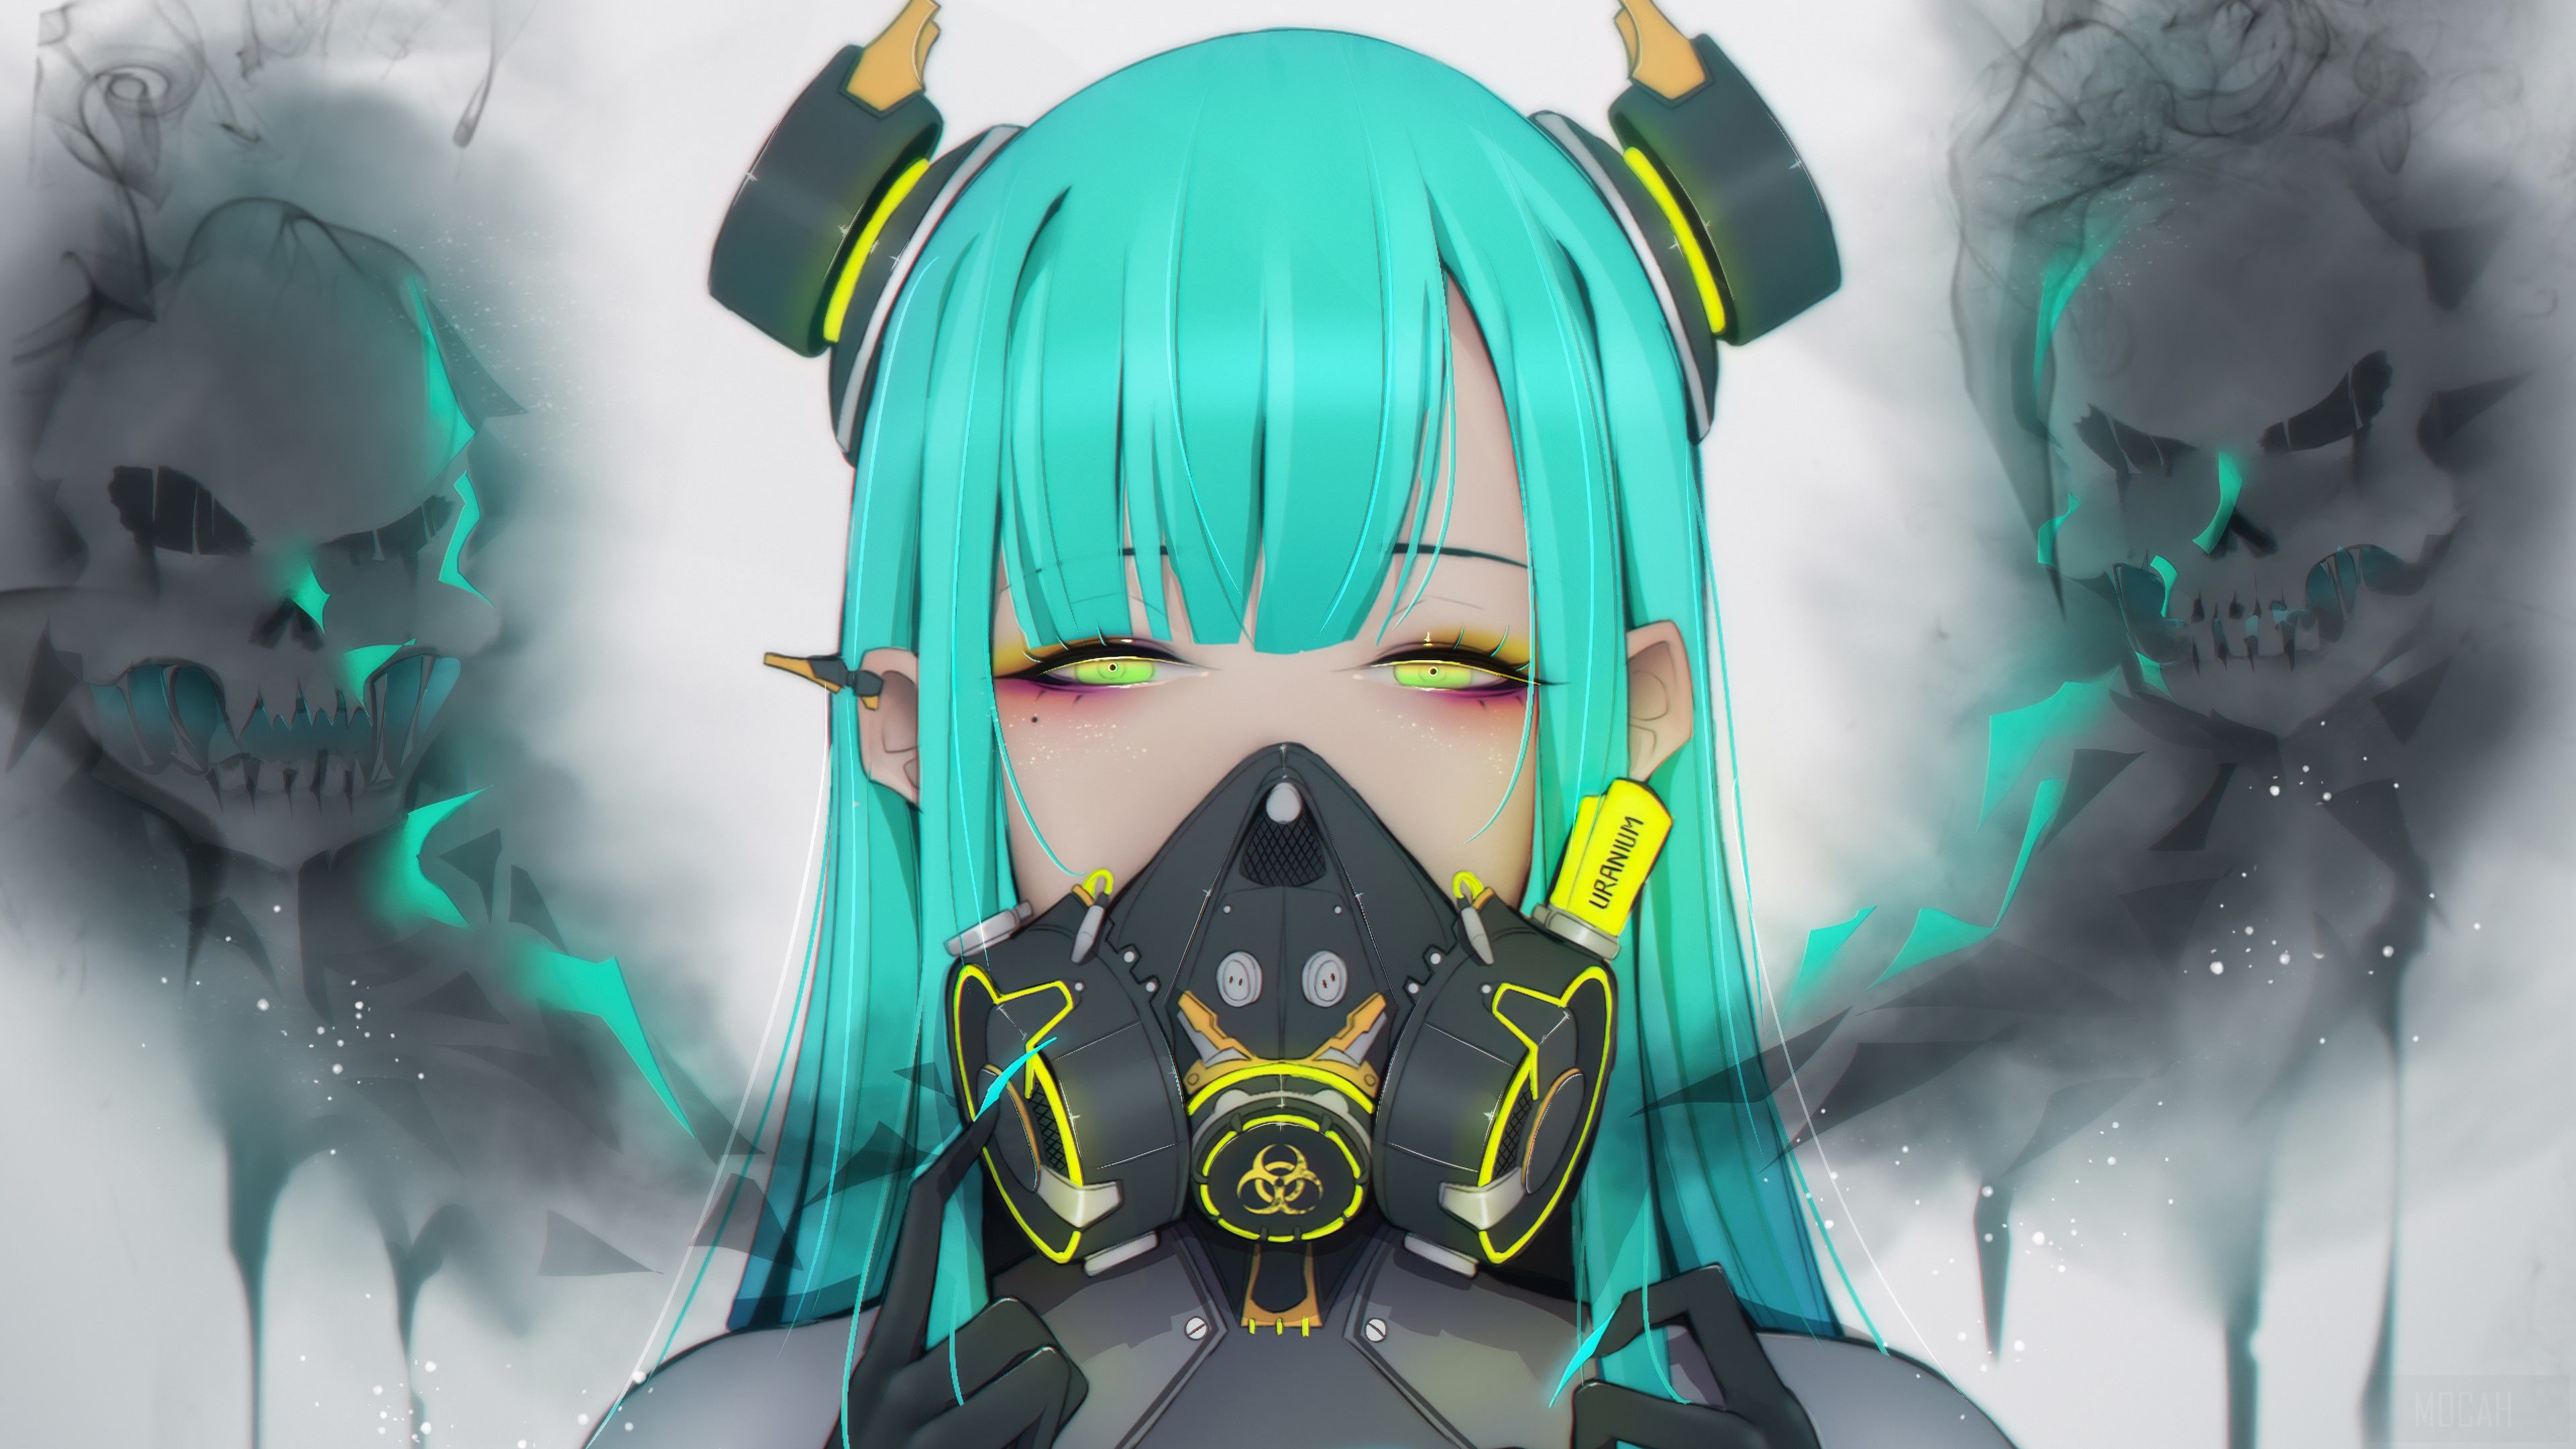 Anime Girl Gas Mask Wallpapers Wallpaper Cave 5225